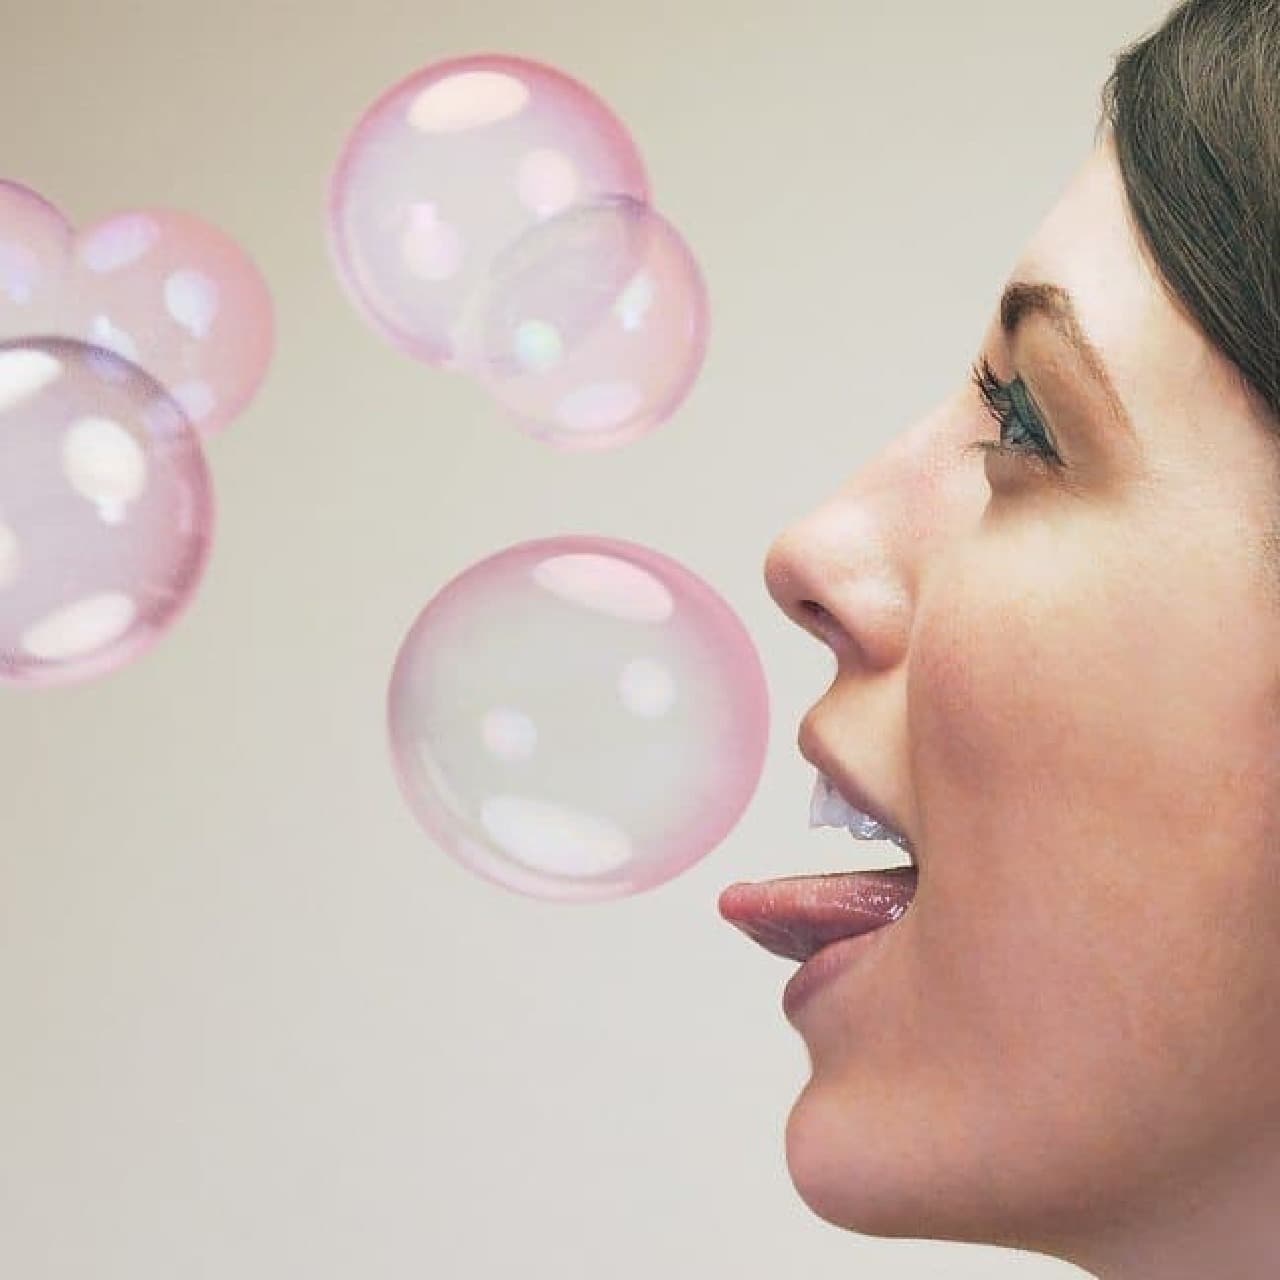 "Bubble Lick" to make your favorite drink a soap bubble